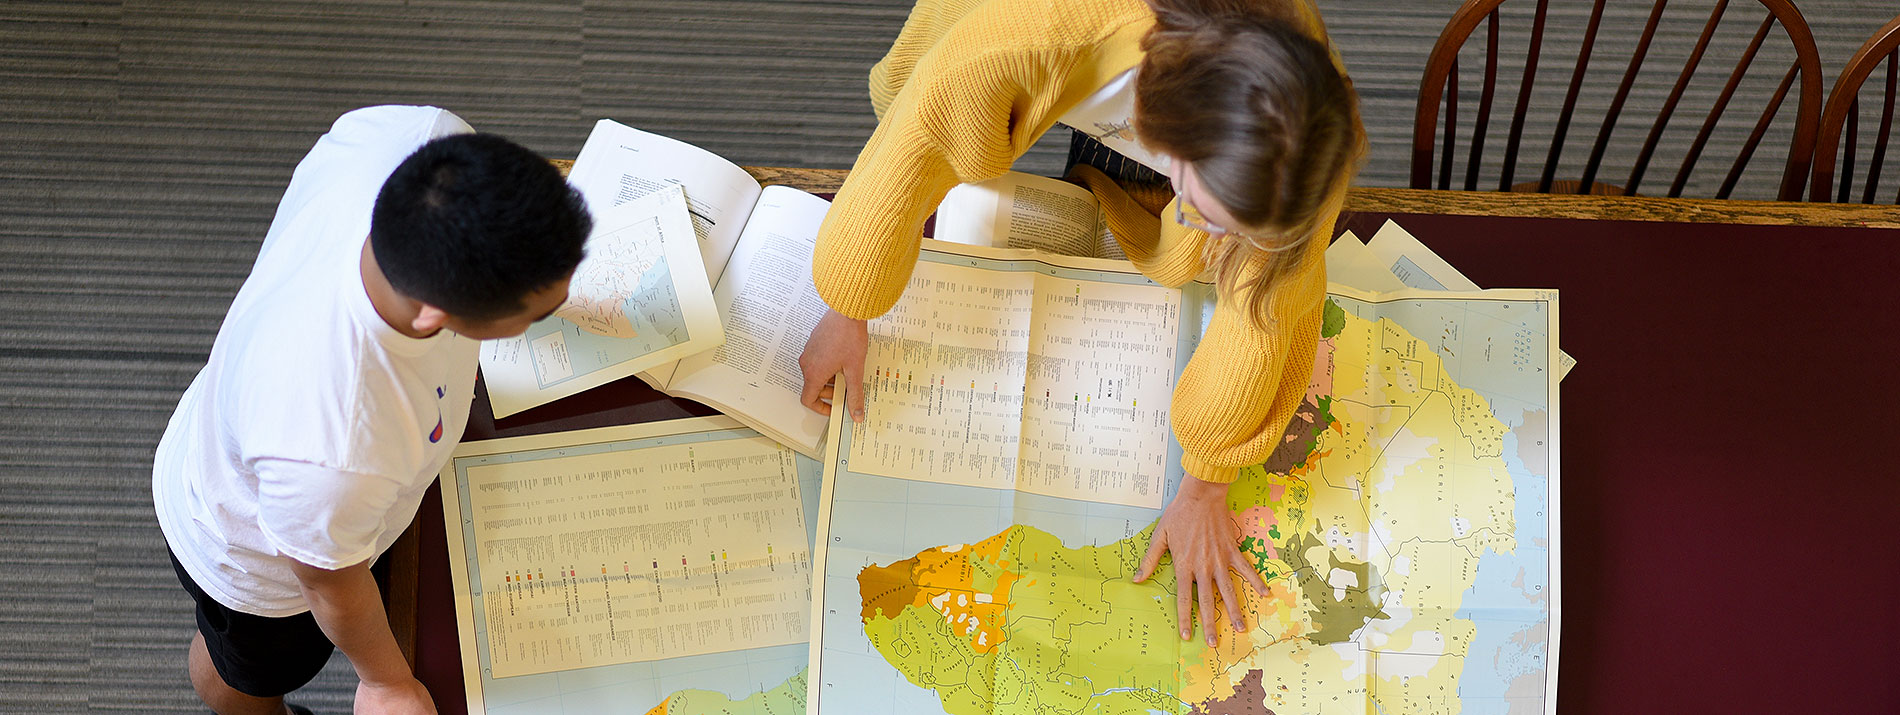 Students study maps at the library